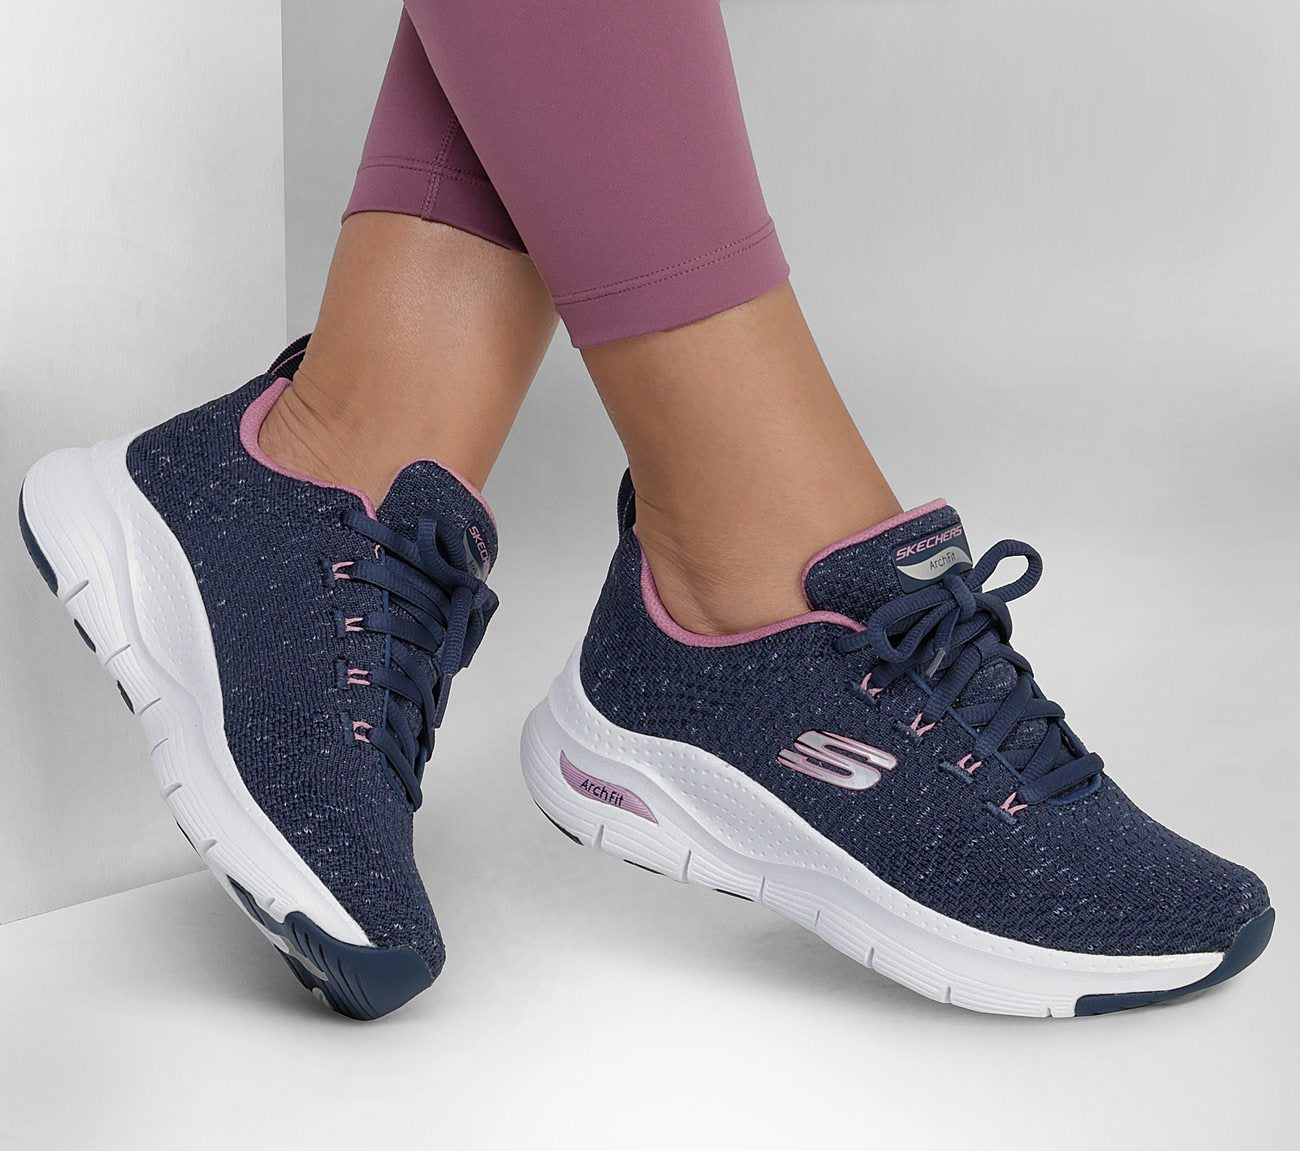 Arch Fit - Glee for all Shoe Skechers